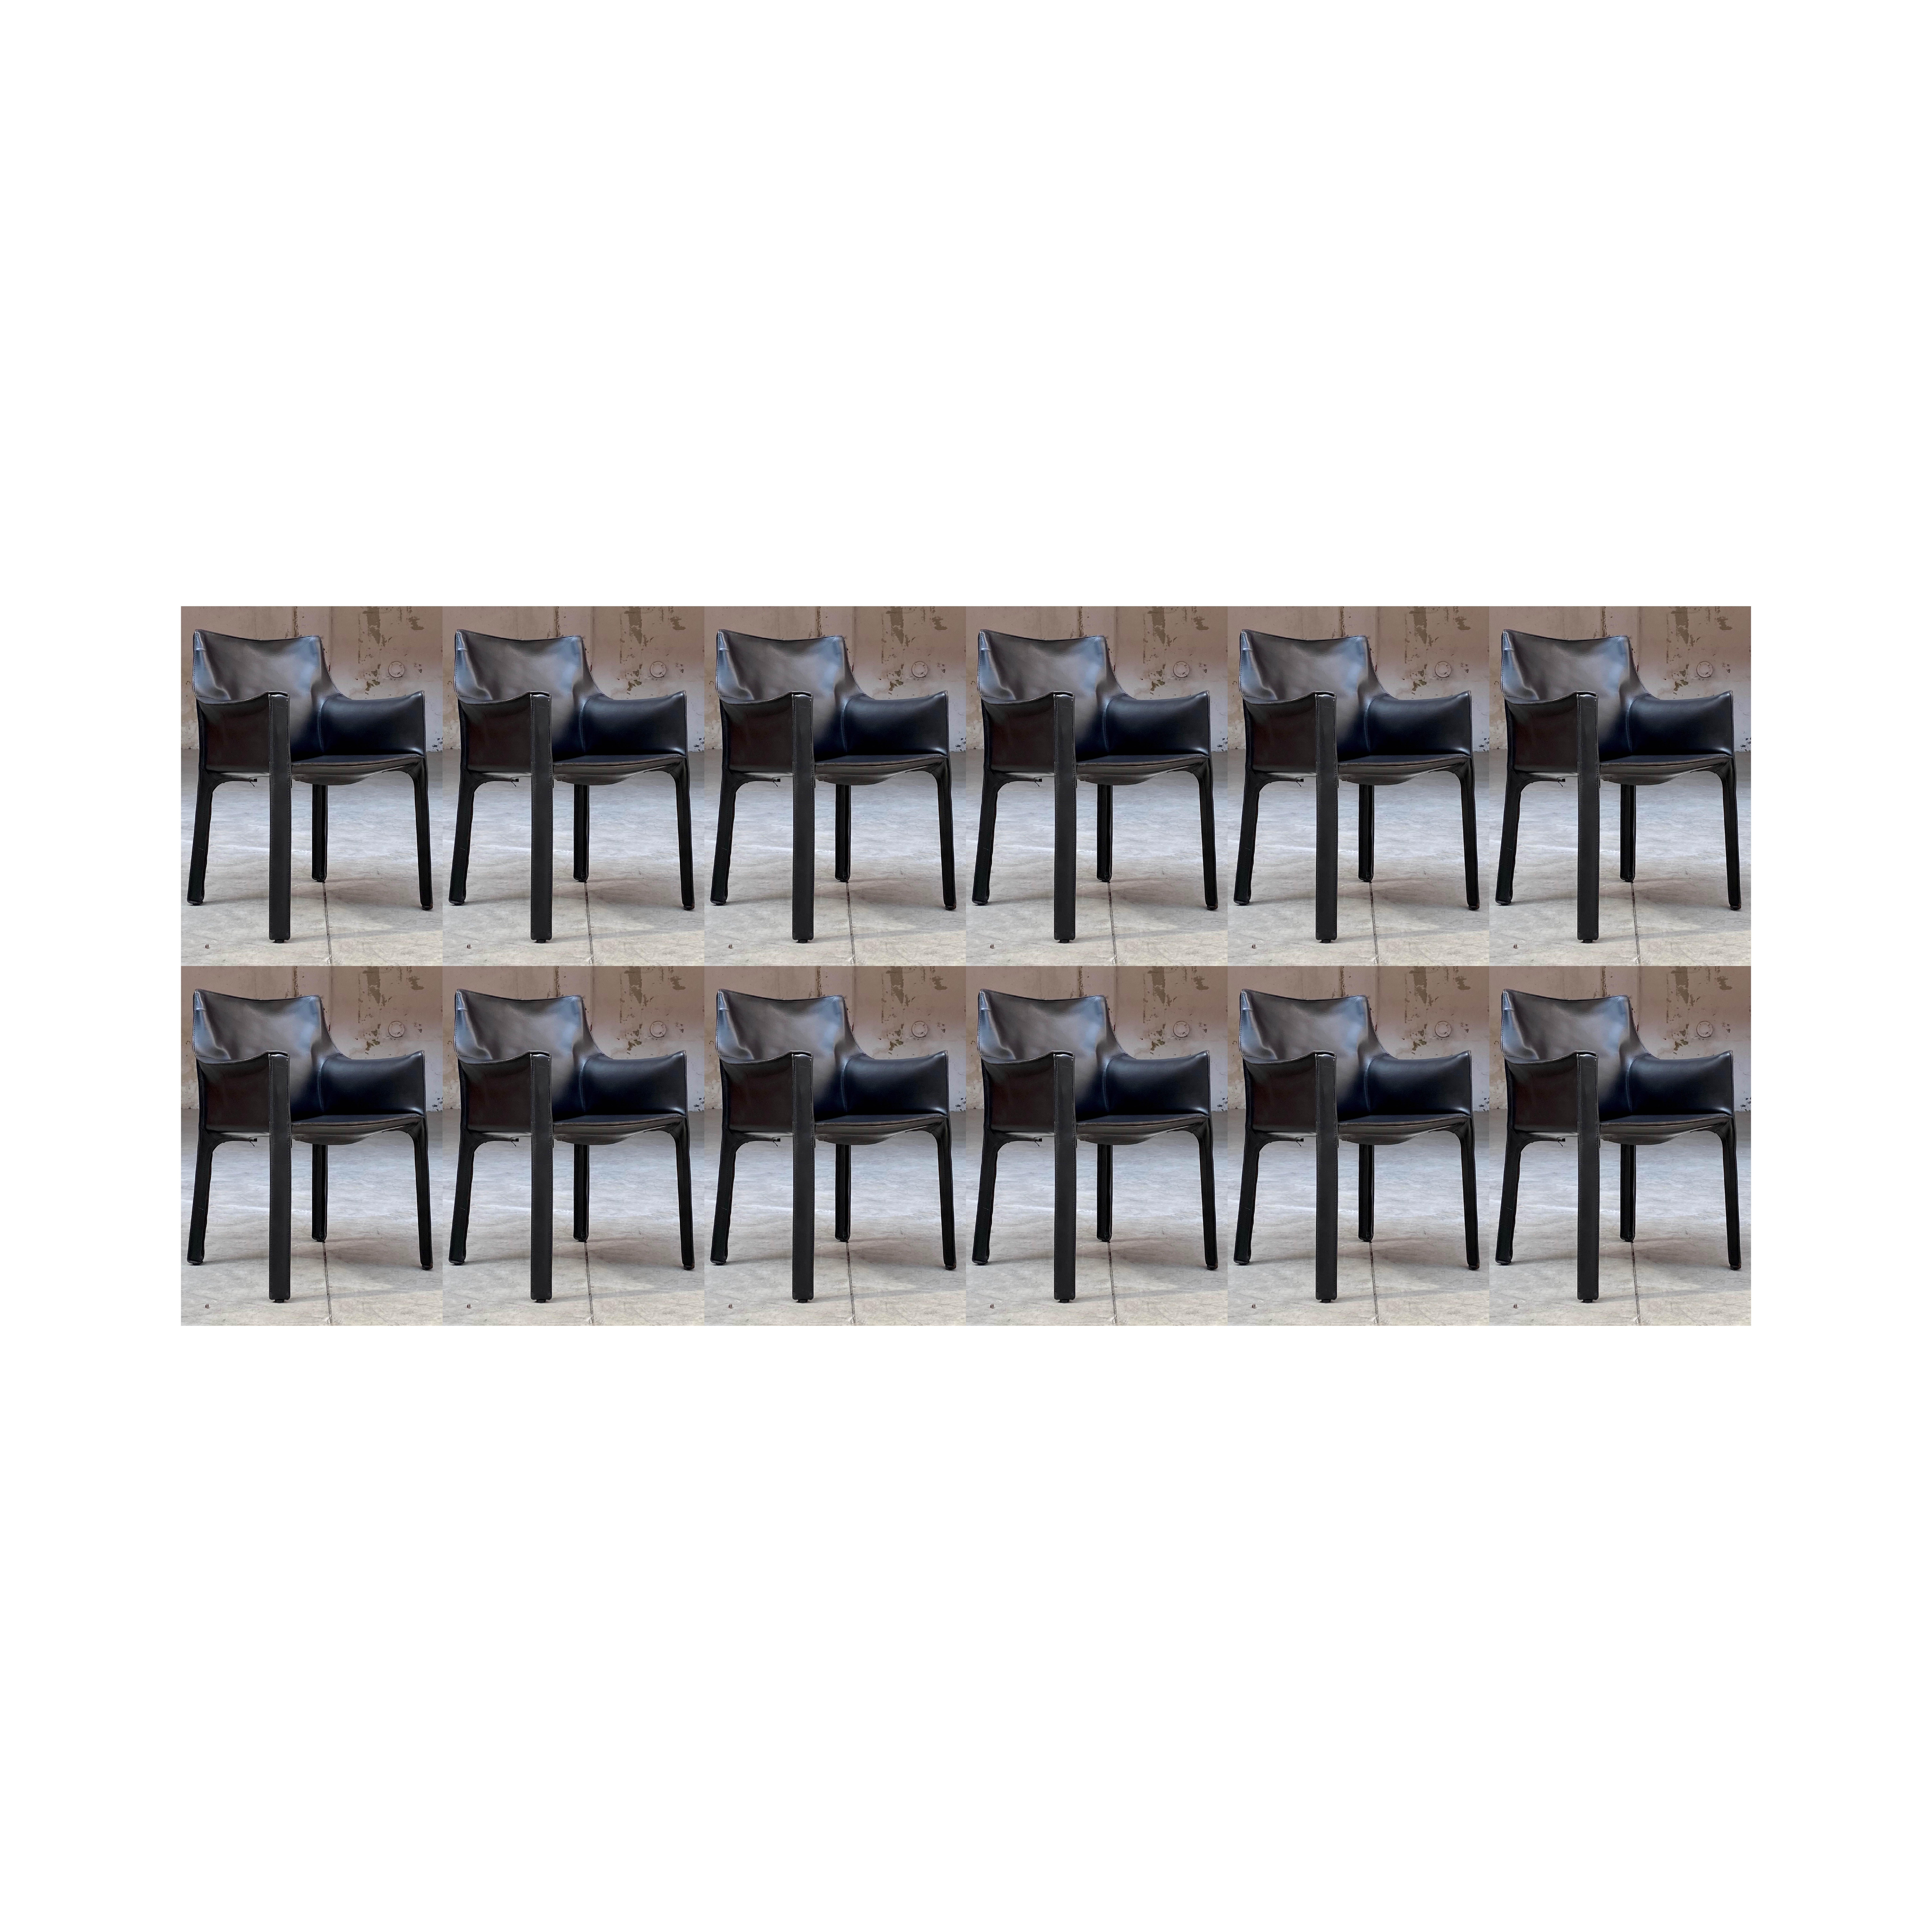 Mario Bellini "CAB 413" Chairs for Cassina in Black, 1977, Set of 12